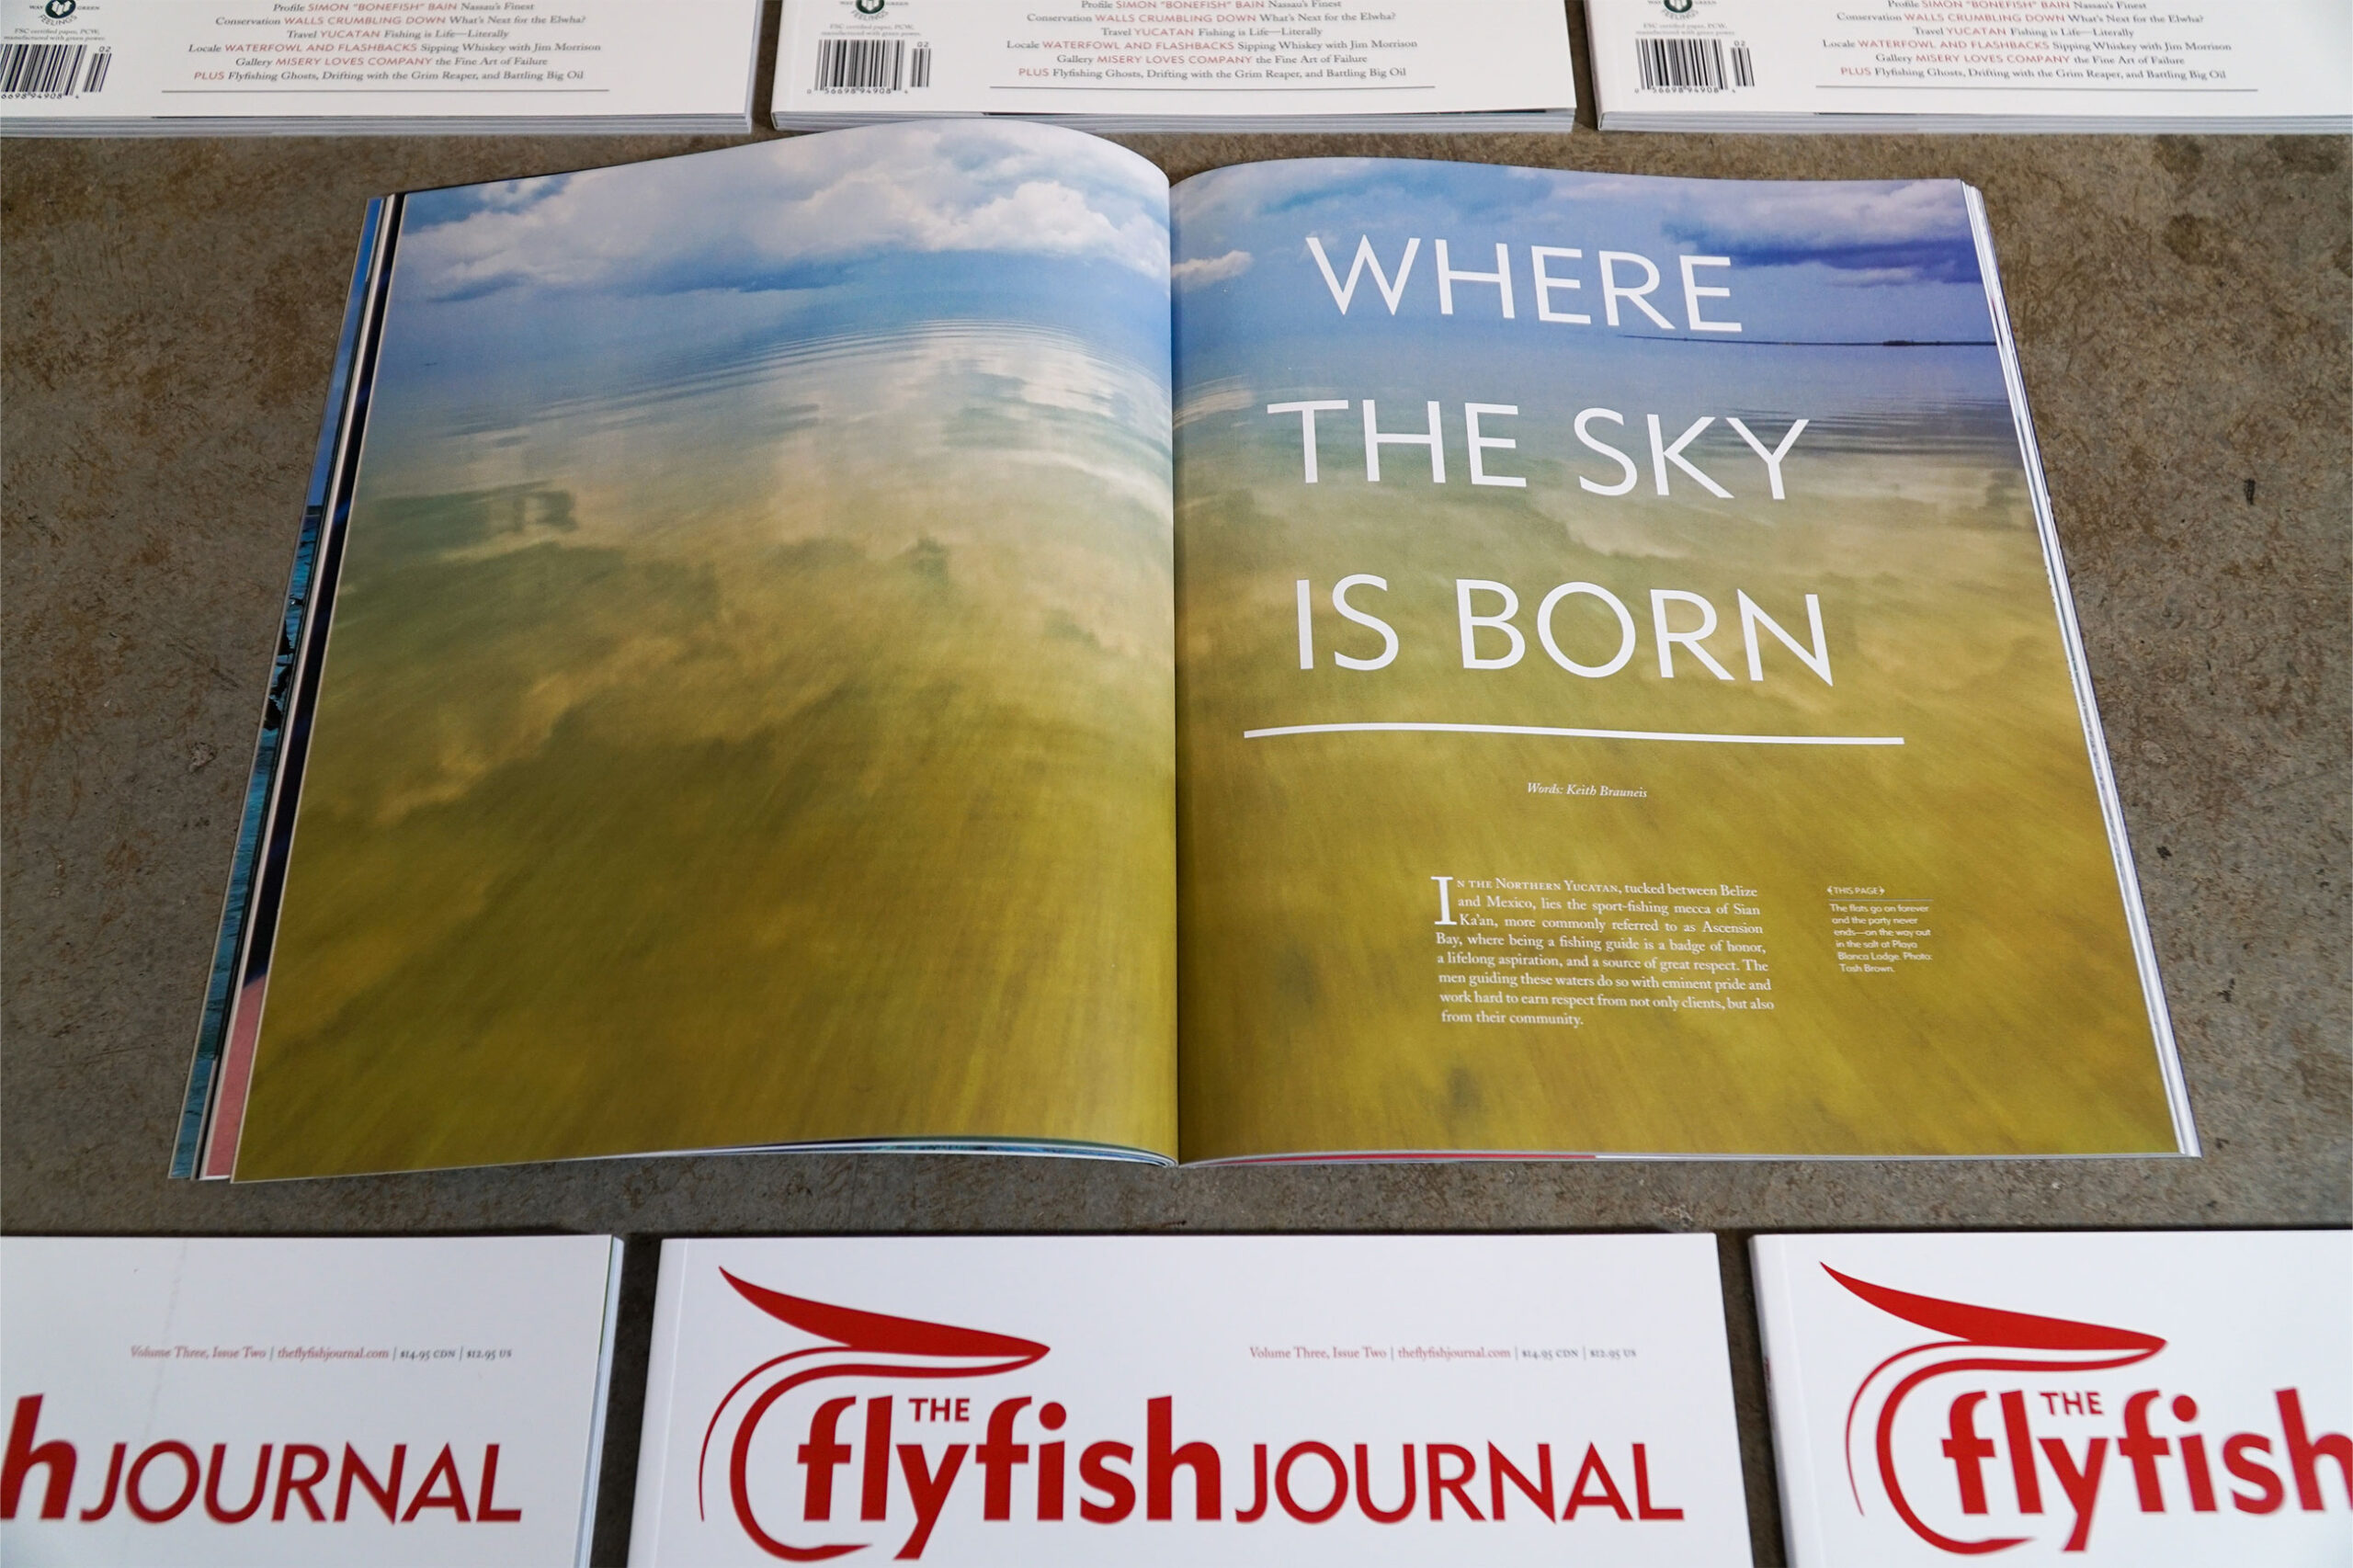 The Flyfish Journal Volume 3 Issue 2 Feature Where the Sky is Born